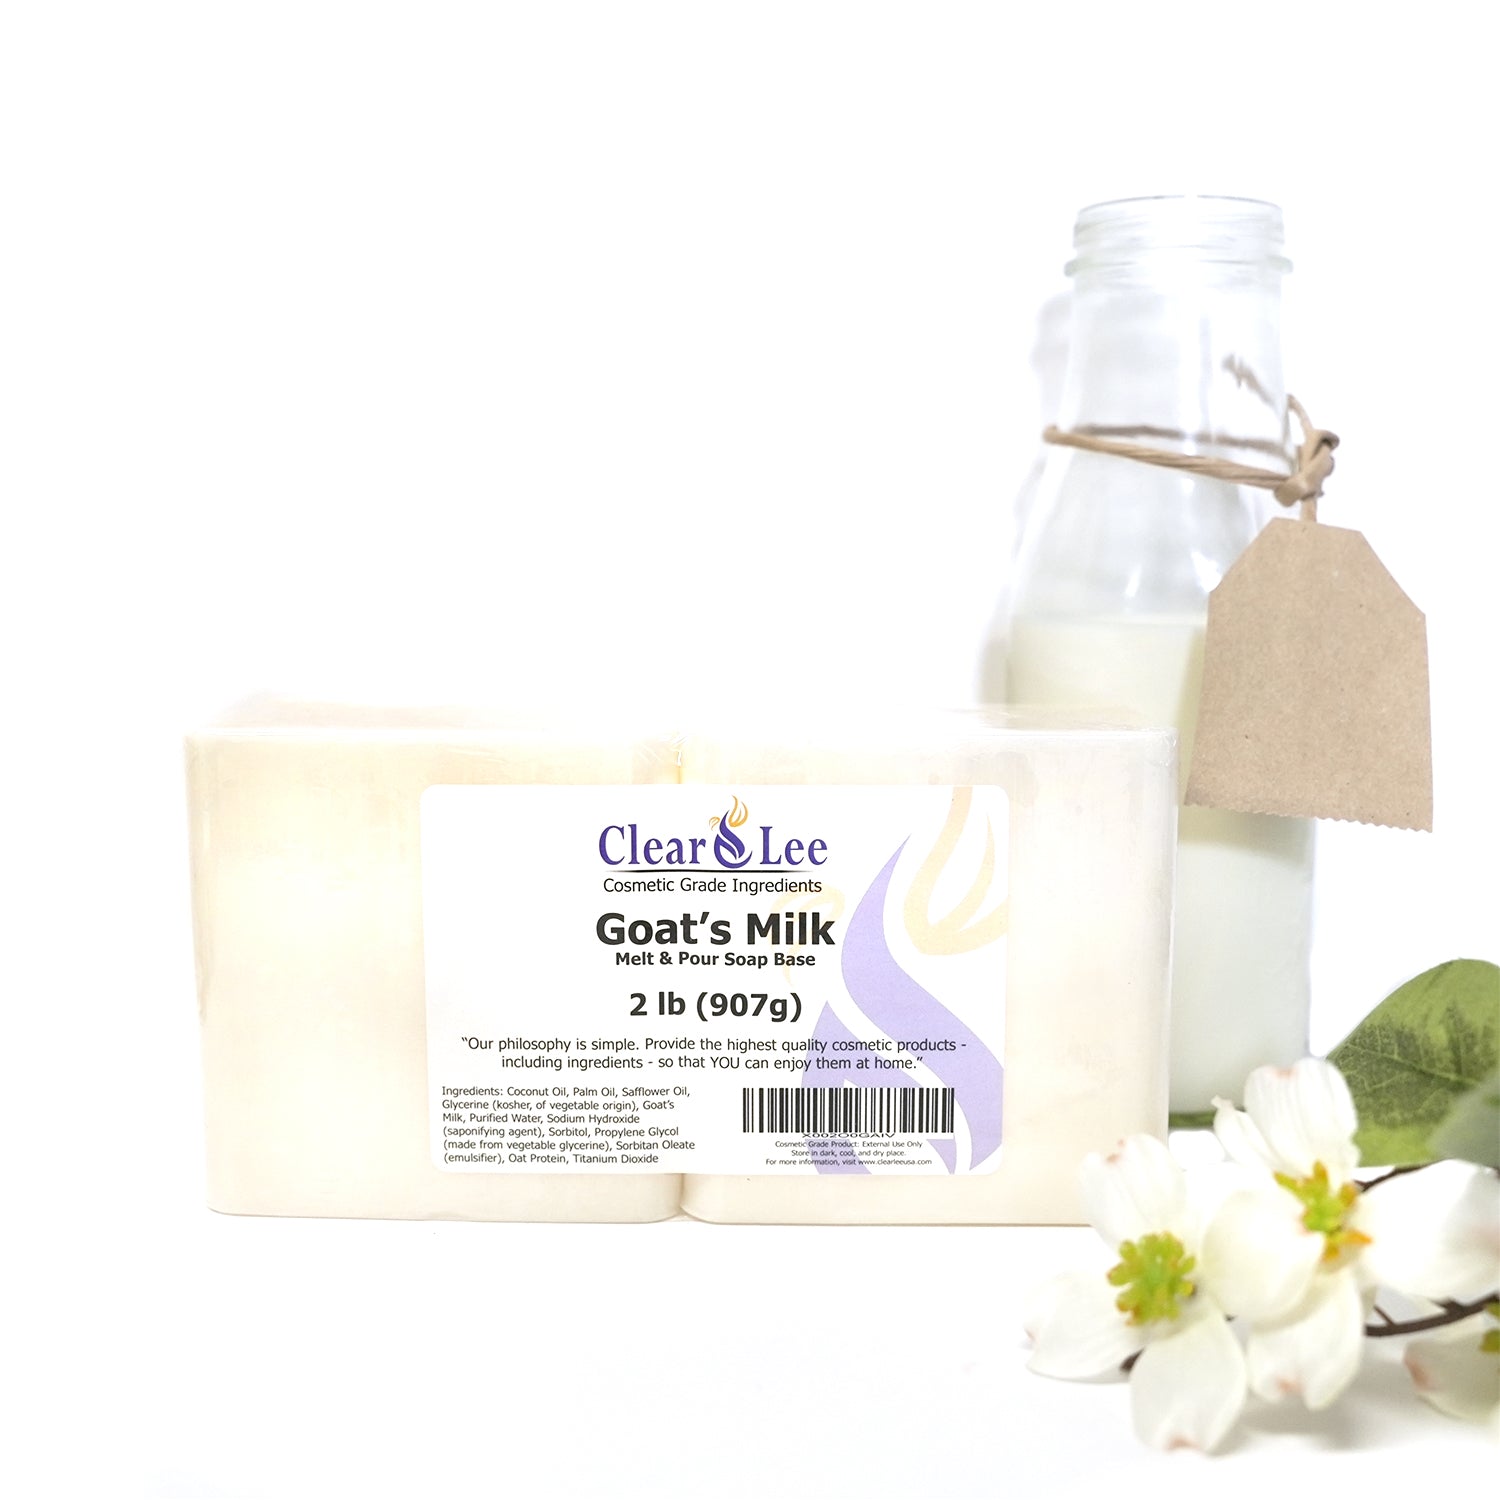 Melt And Pour Goat Milk Soap - A Chick And Her Garden